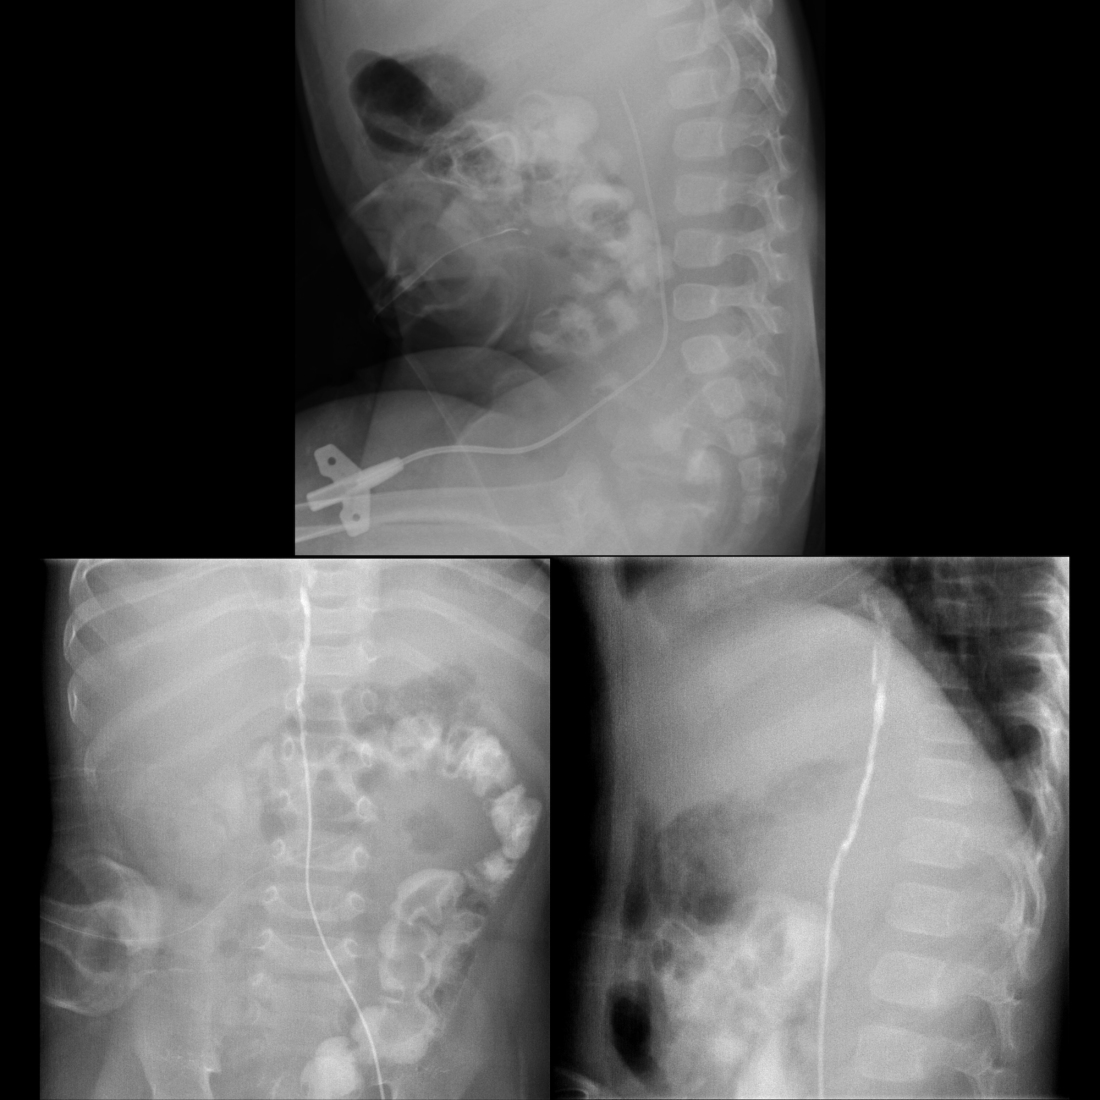 Infant with a femoral line that does not infuse